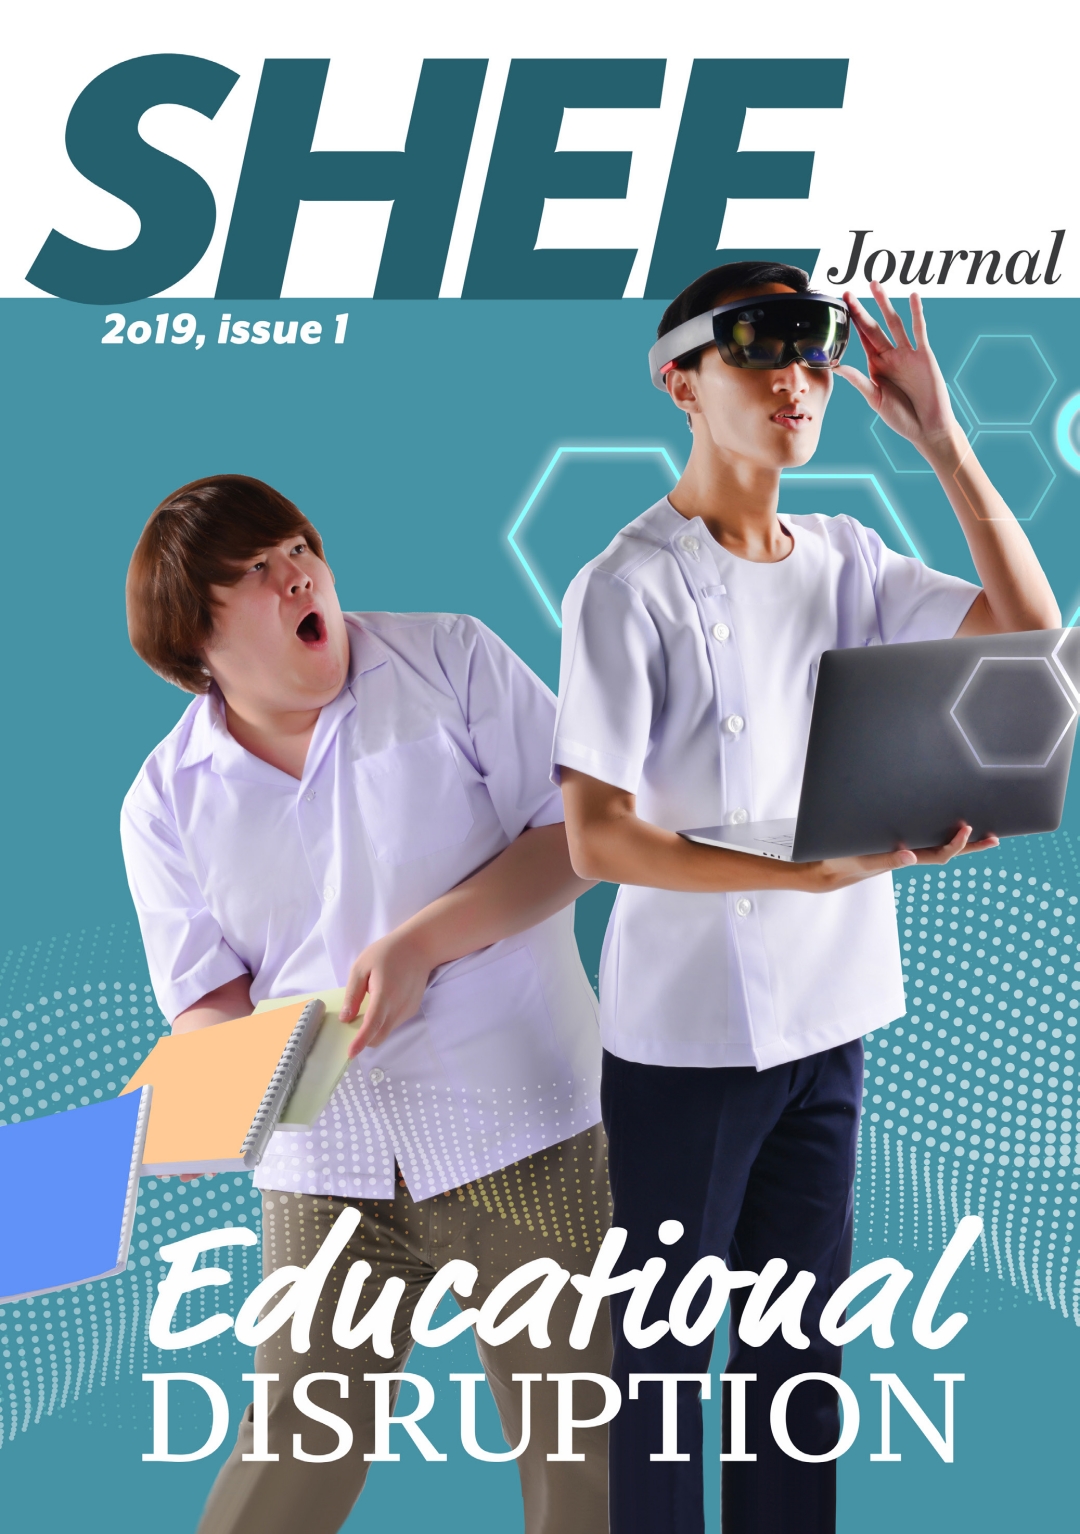 journal-2019-01-cover17